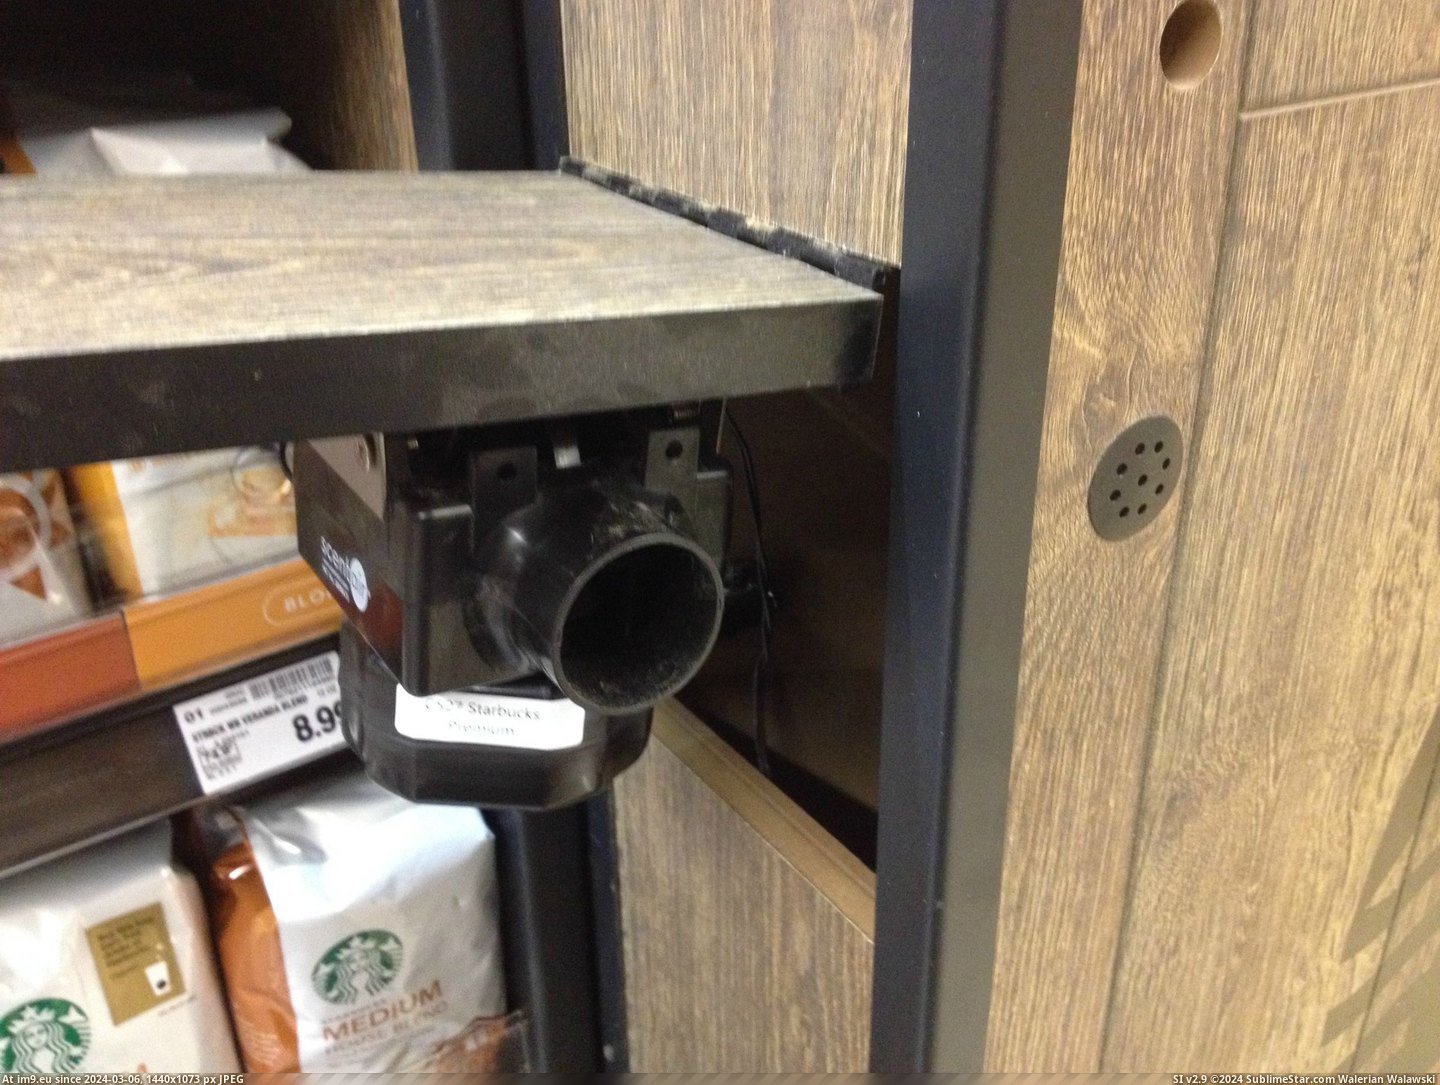 #Work #New #Secret #Smell #Delivery #Starbucks #Coffee #System #Display [Mildlyinteresting] The new Starbucks display at my work has a secret coffee smell delivery system. 5 Pic. (Bild von album My r/MILDLYINTERESTING favs))